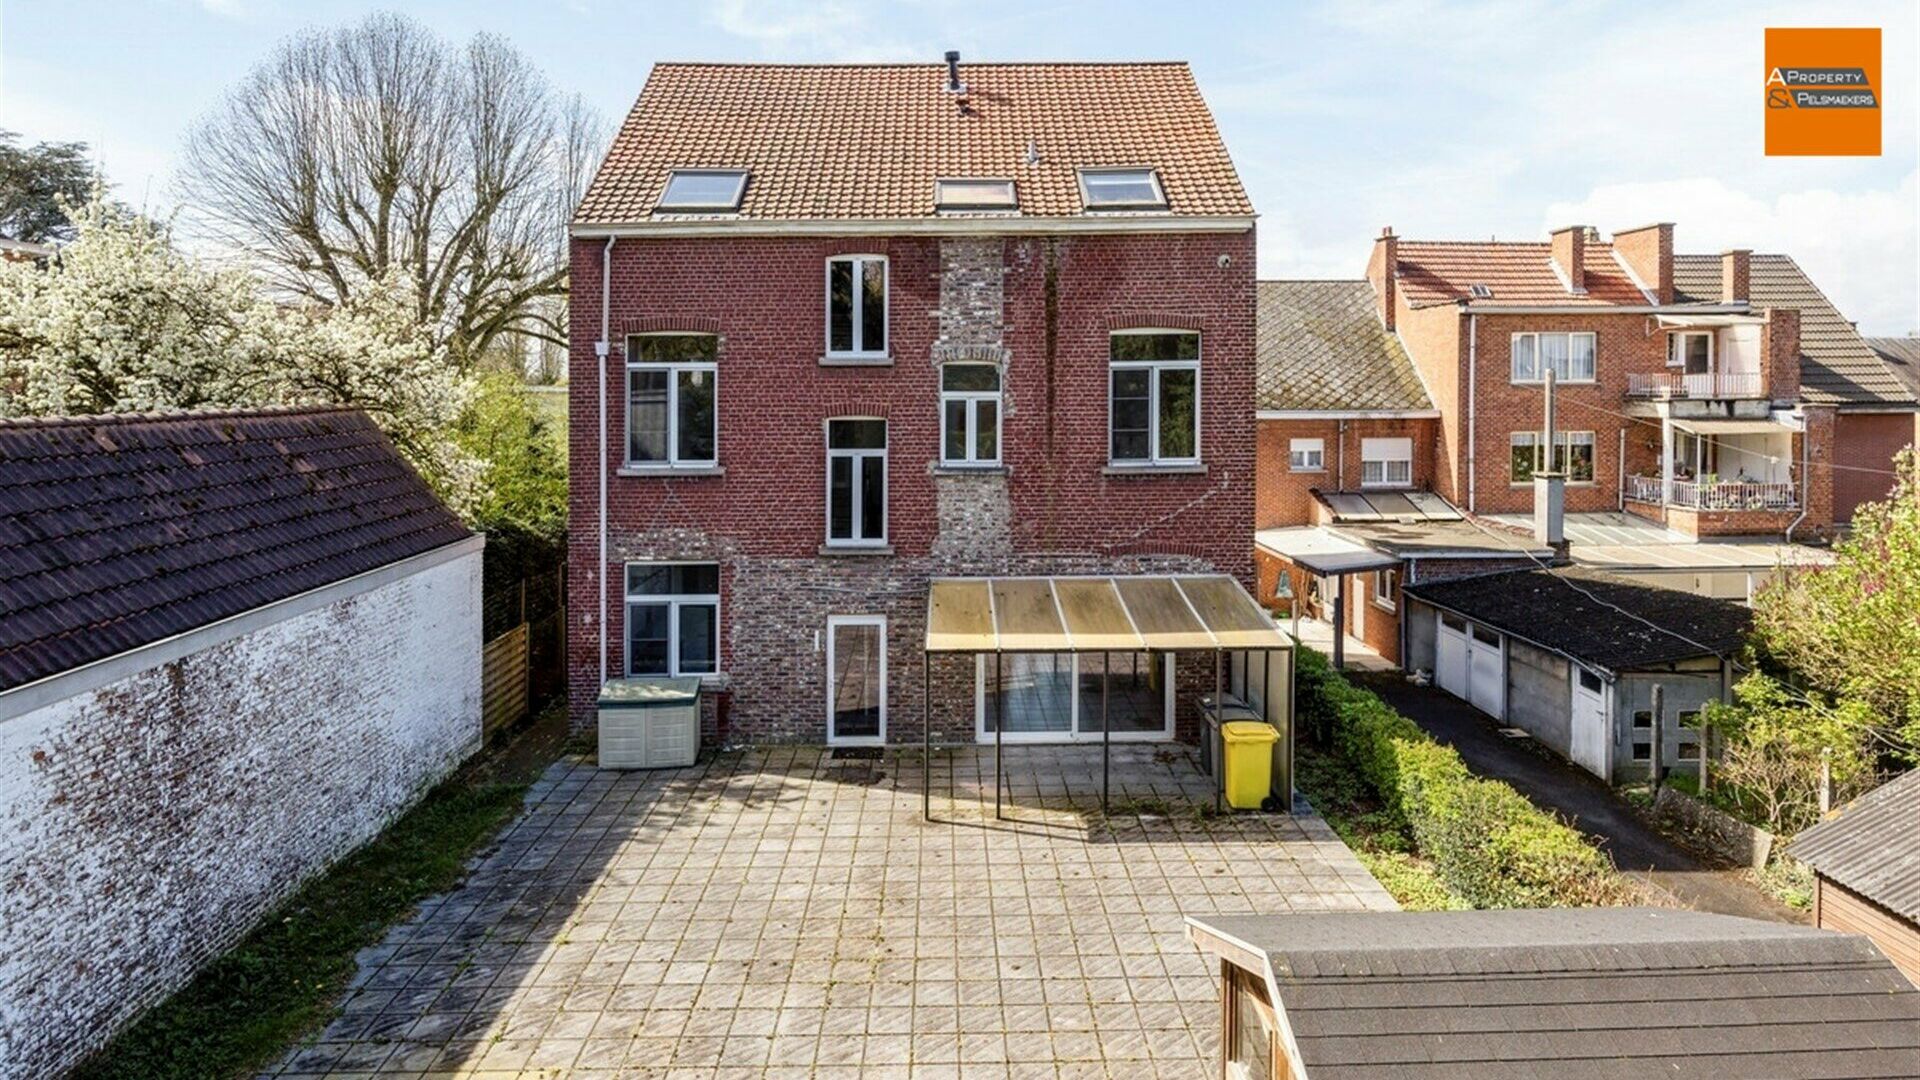 Property with character for sale in KORTENBERG